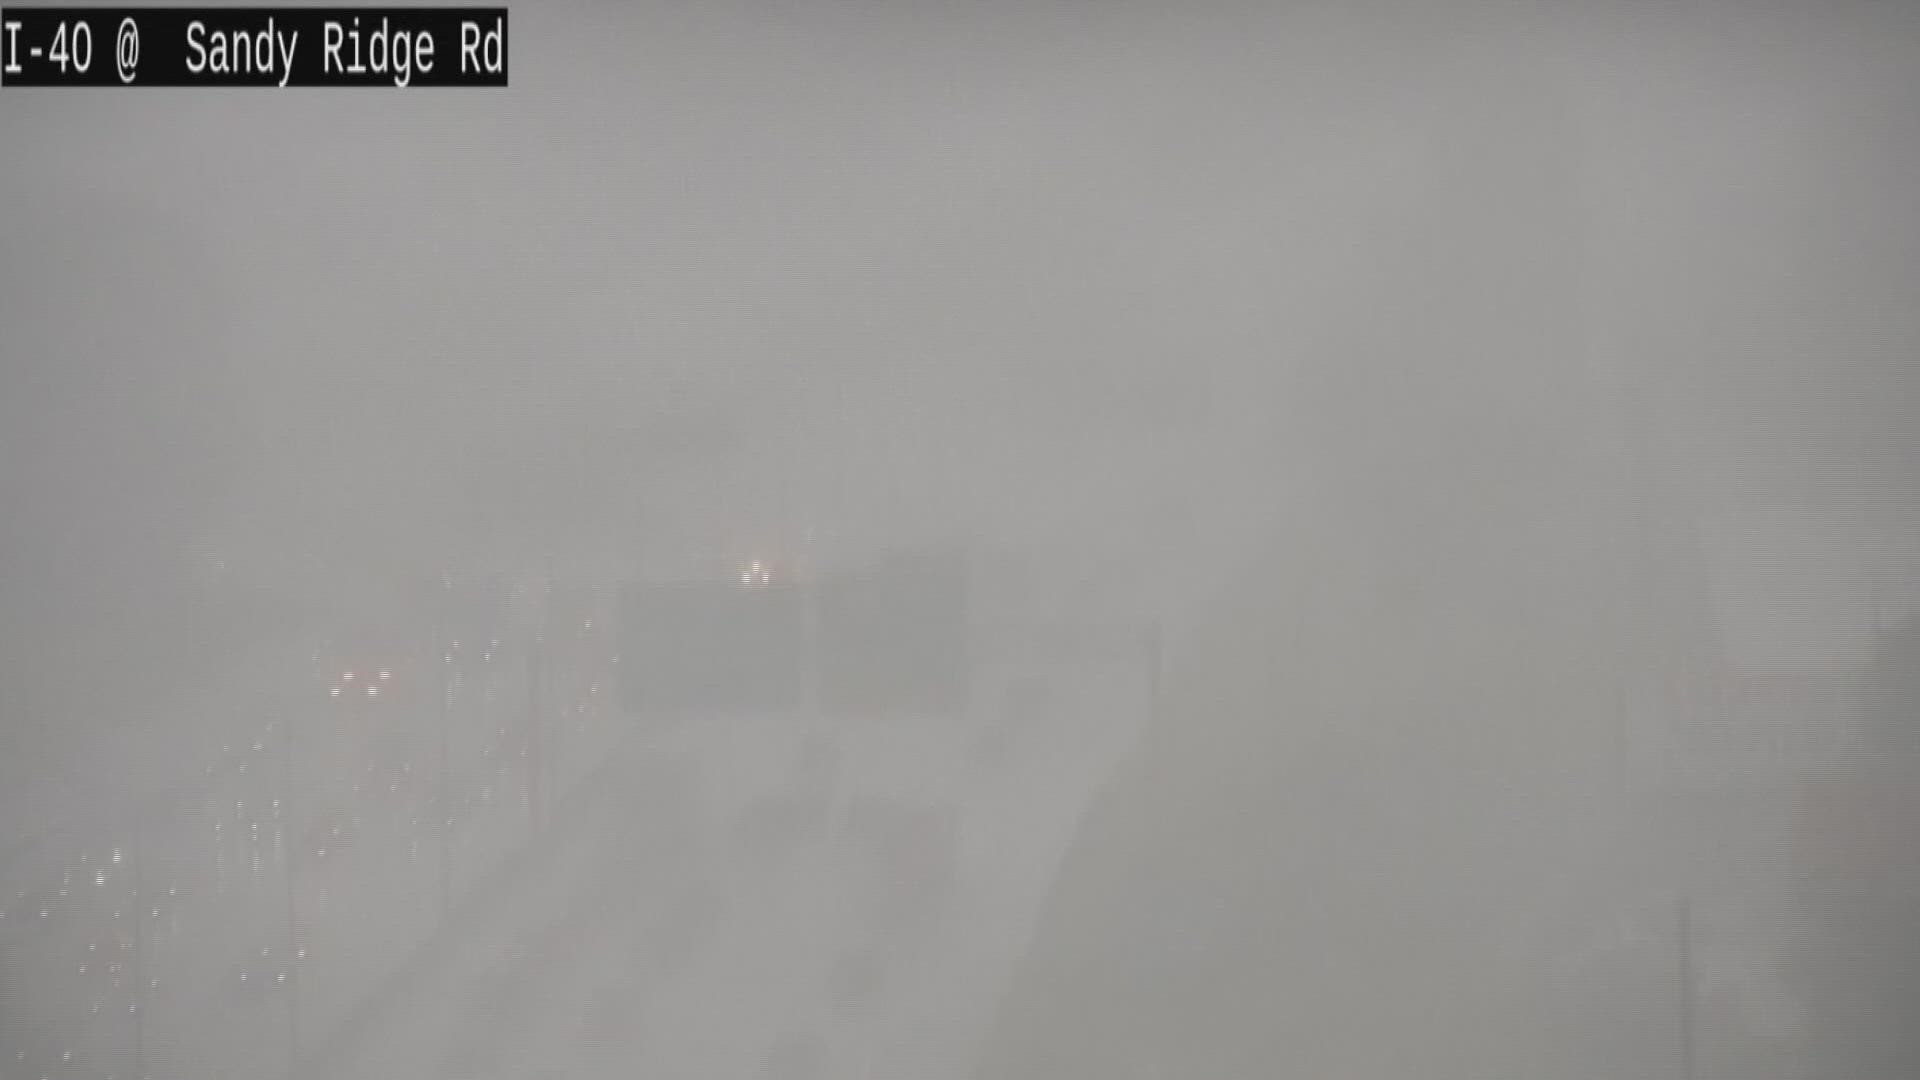 Video shows conditions go from almost no visibility to mostly cleared up in about nine minutes.